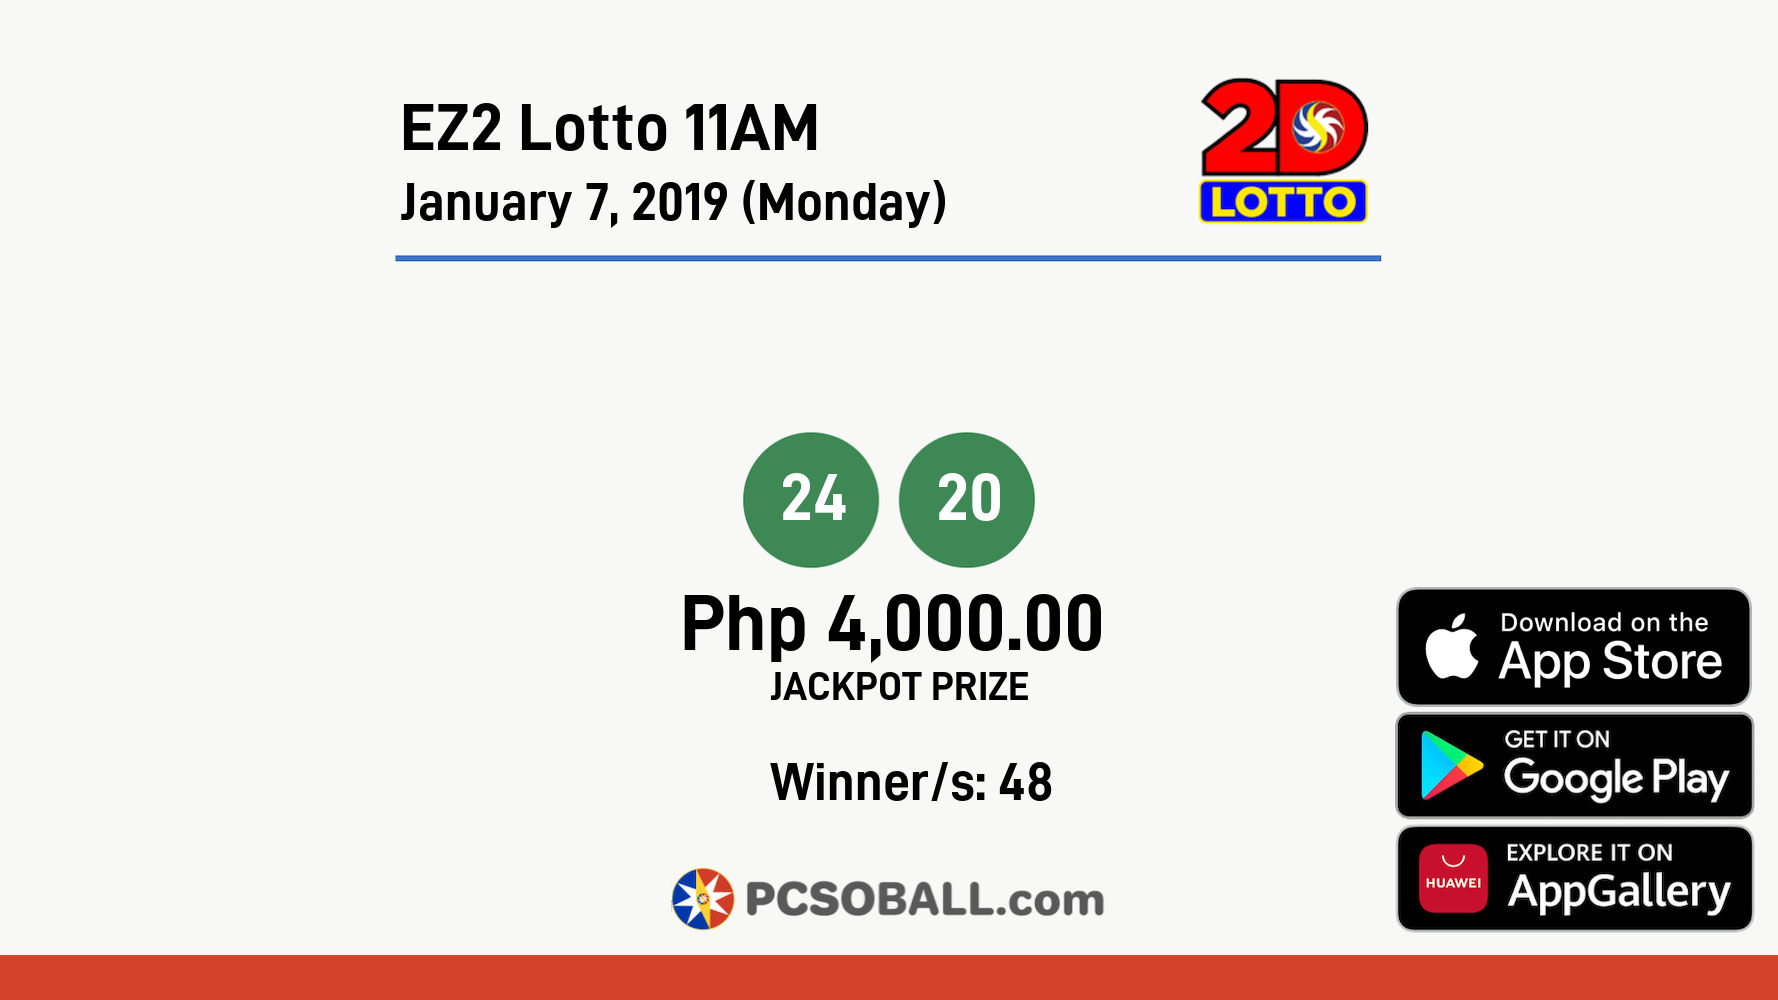 EZ2 Lotto 11AM January 7, 2019 (Monday) Result